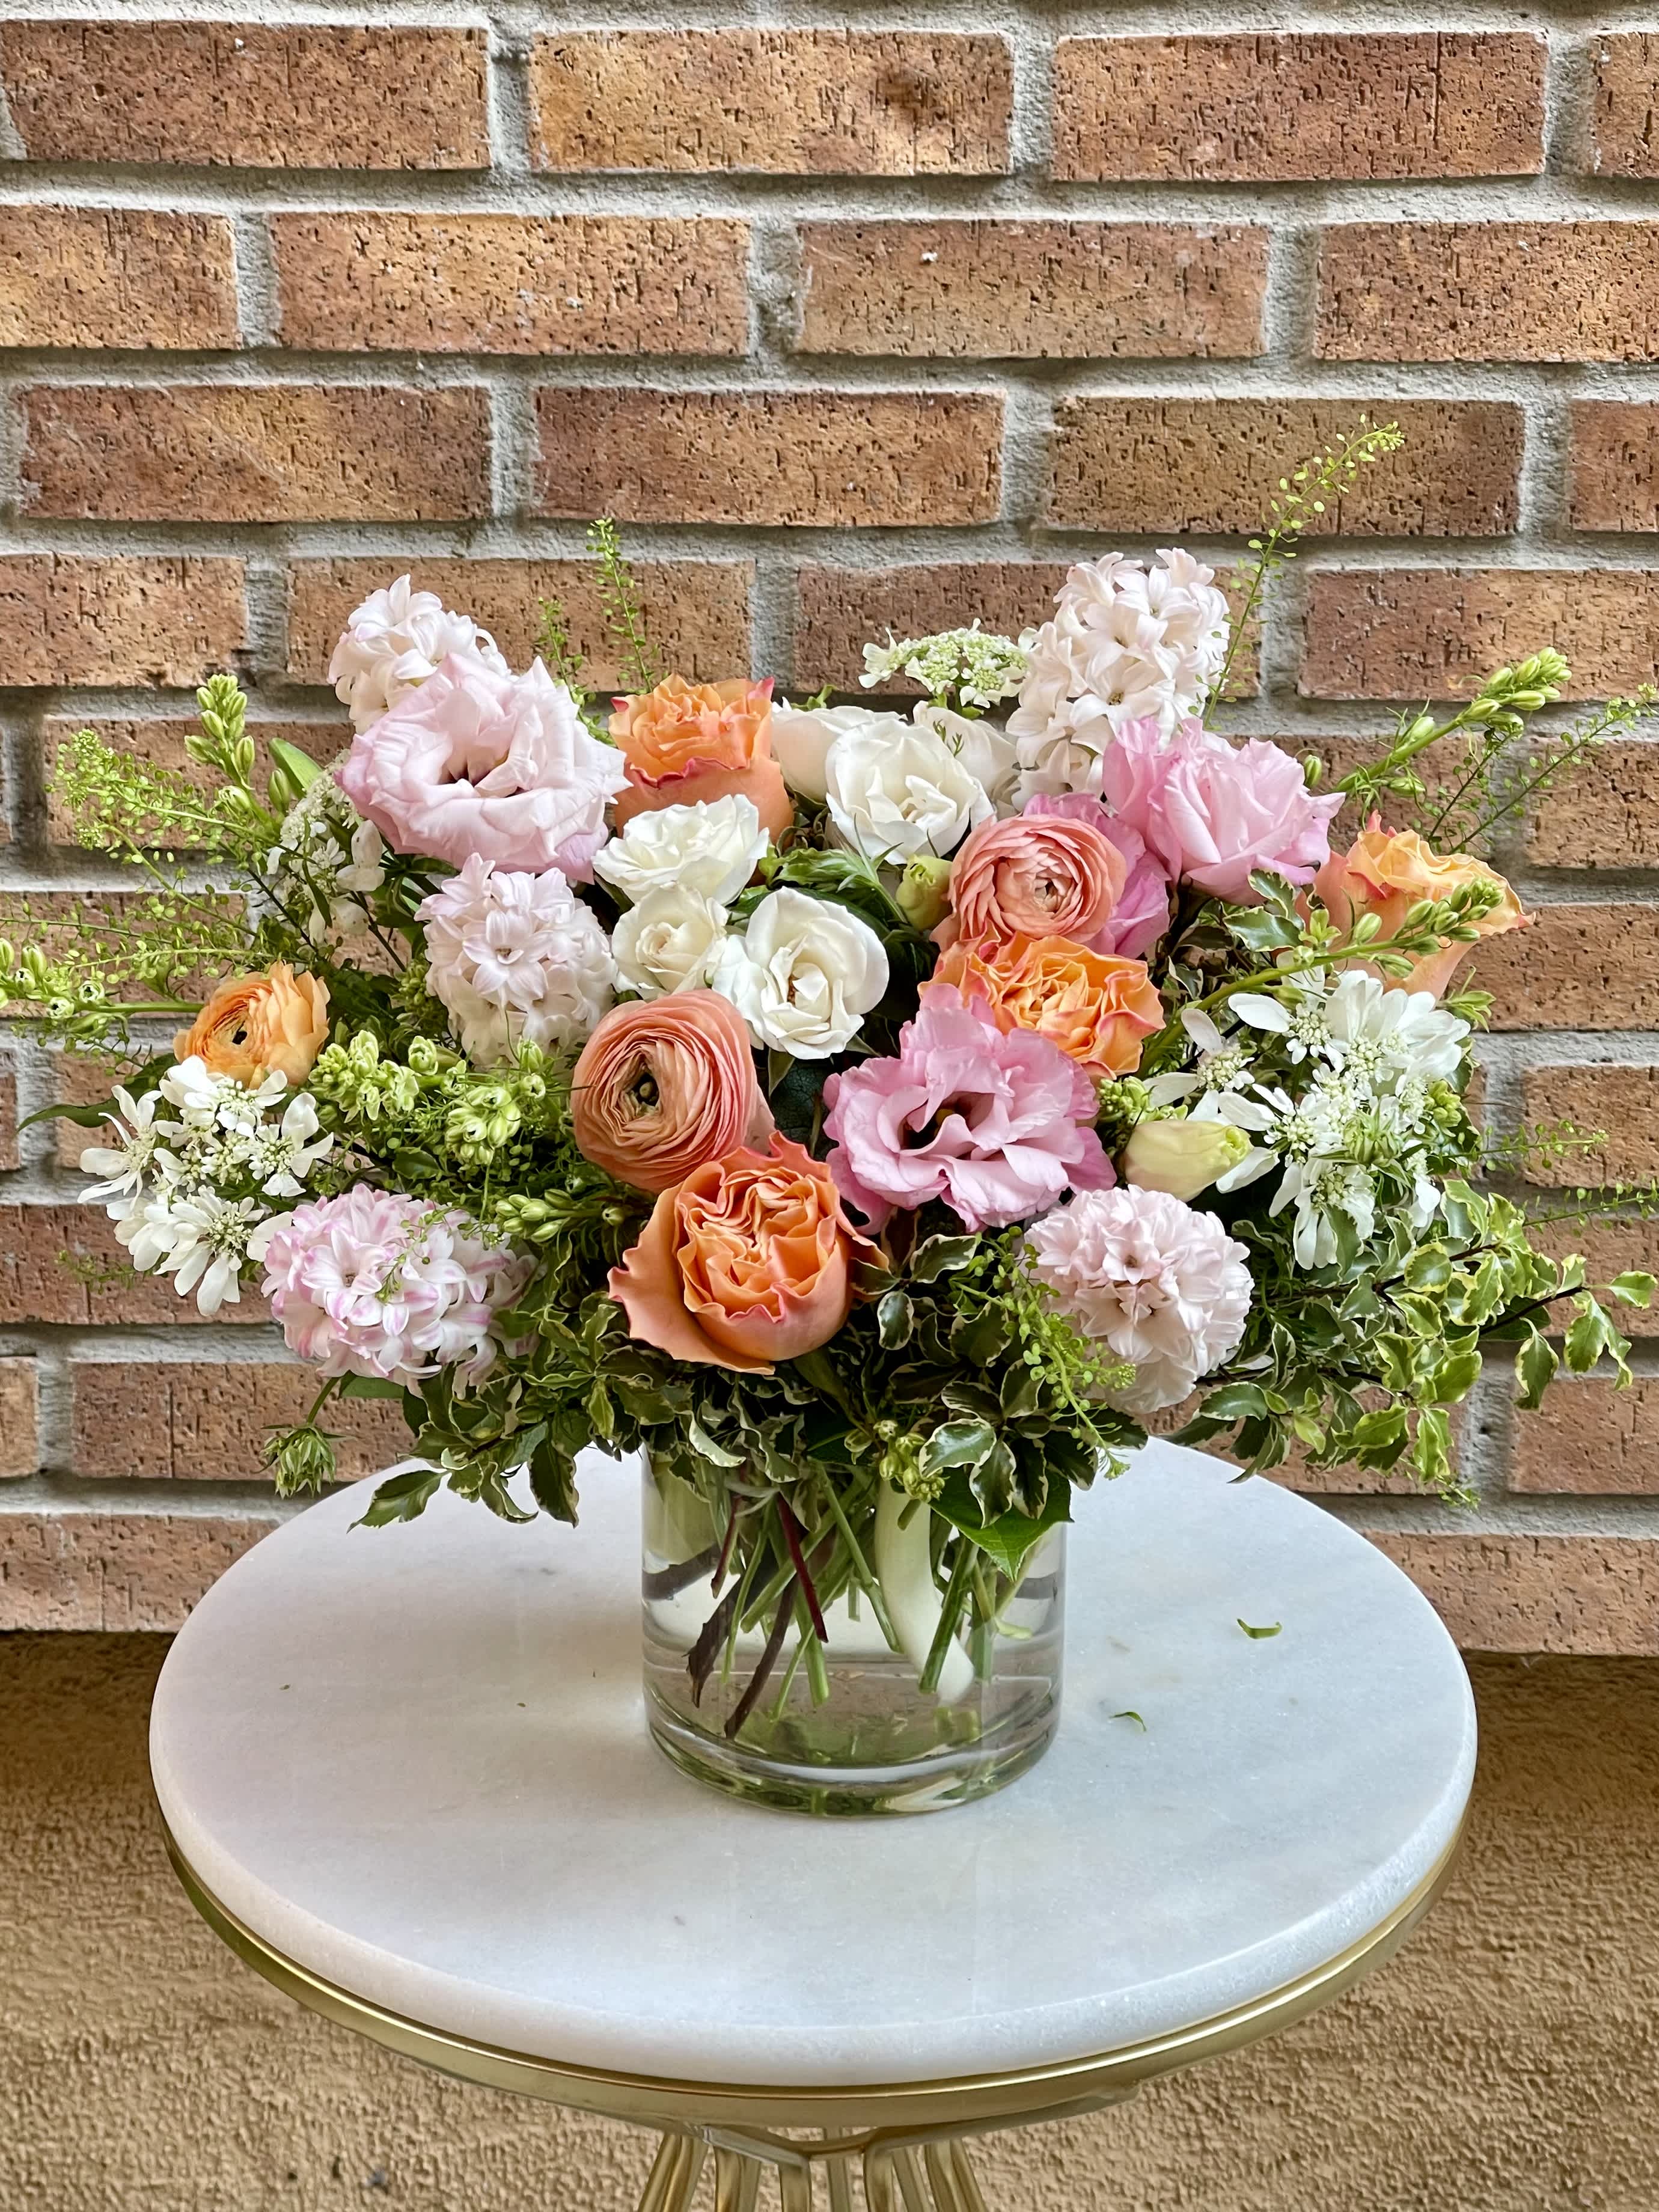 Featured Design - Every week we feature a new design that includes some of our favorite flowers. Available for a limited time only.  This arrangement of beautiful shades of pinks, coral and ivory flowers in a clear glass cylinder vase includes hyacinth, roses, ranunculus, lisianthus, majolica spray rose, variegated Italian pittosporum and thlaspi foliage.  Vase dimension: 5”W X 5”H